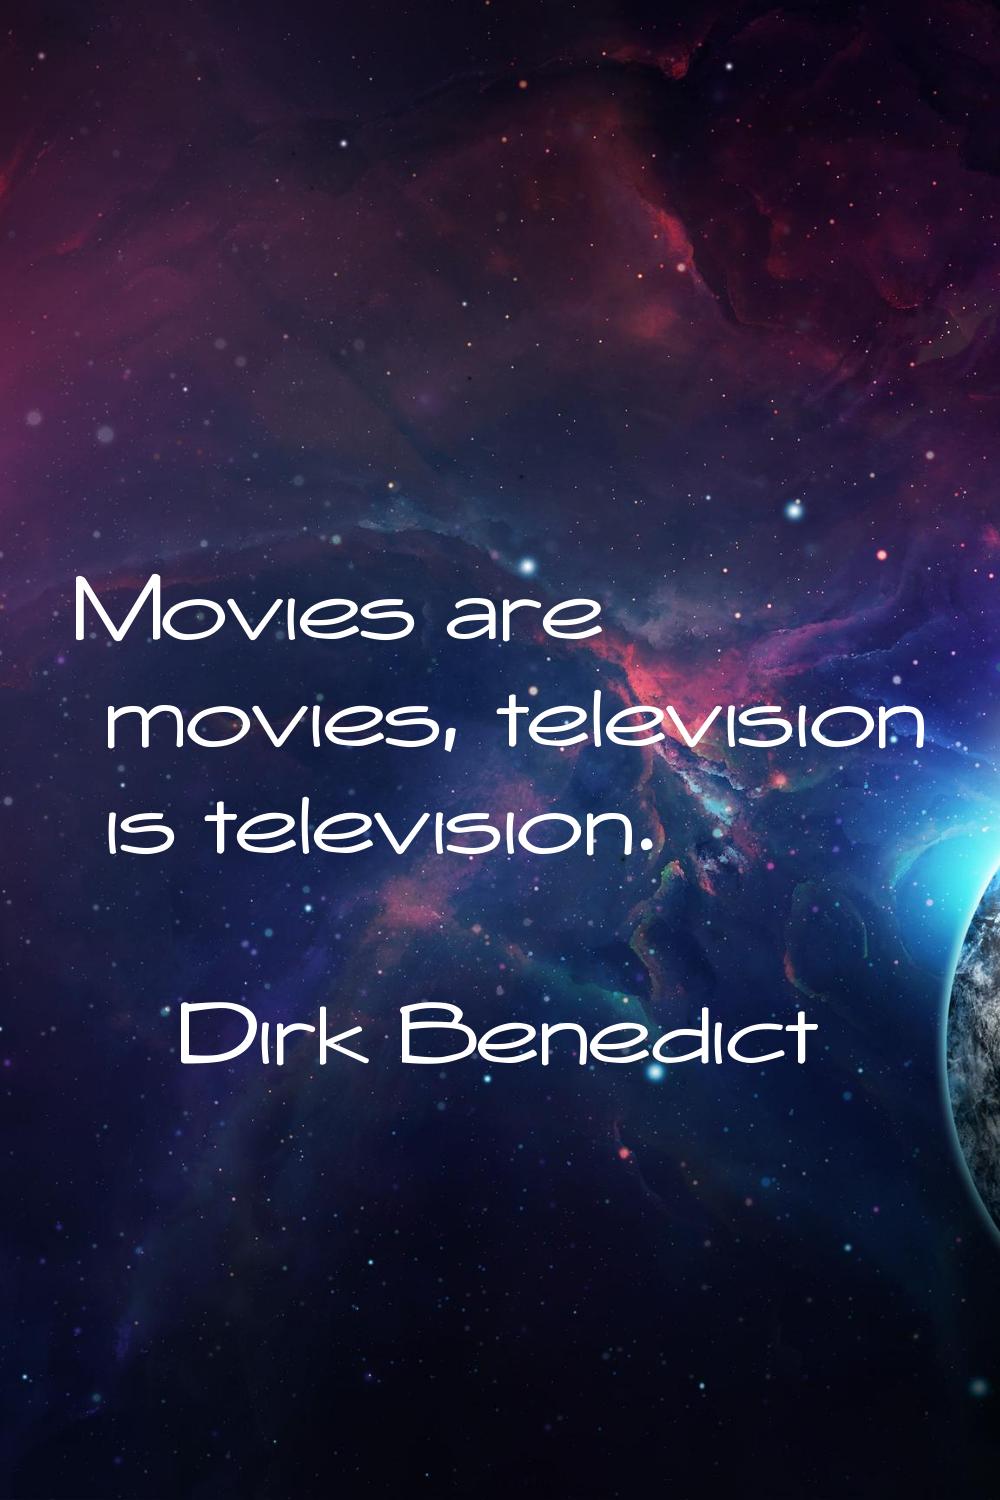 Movies are movies, television is television.